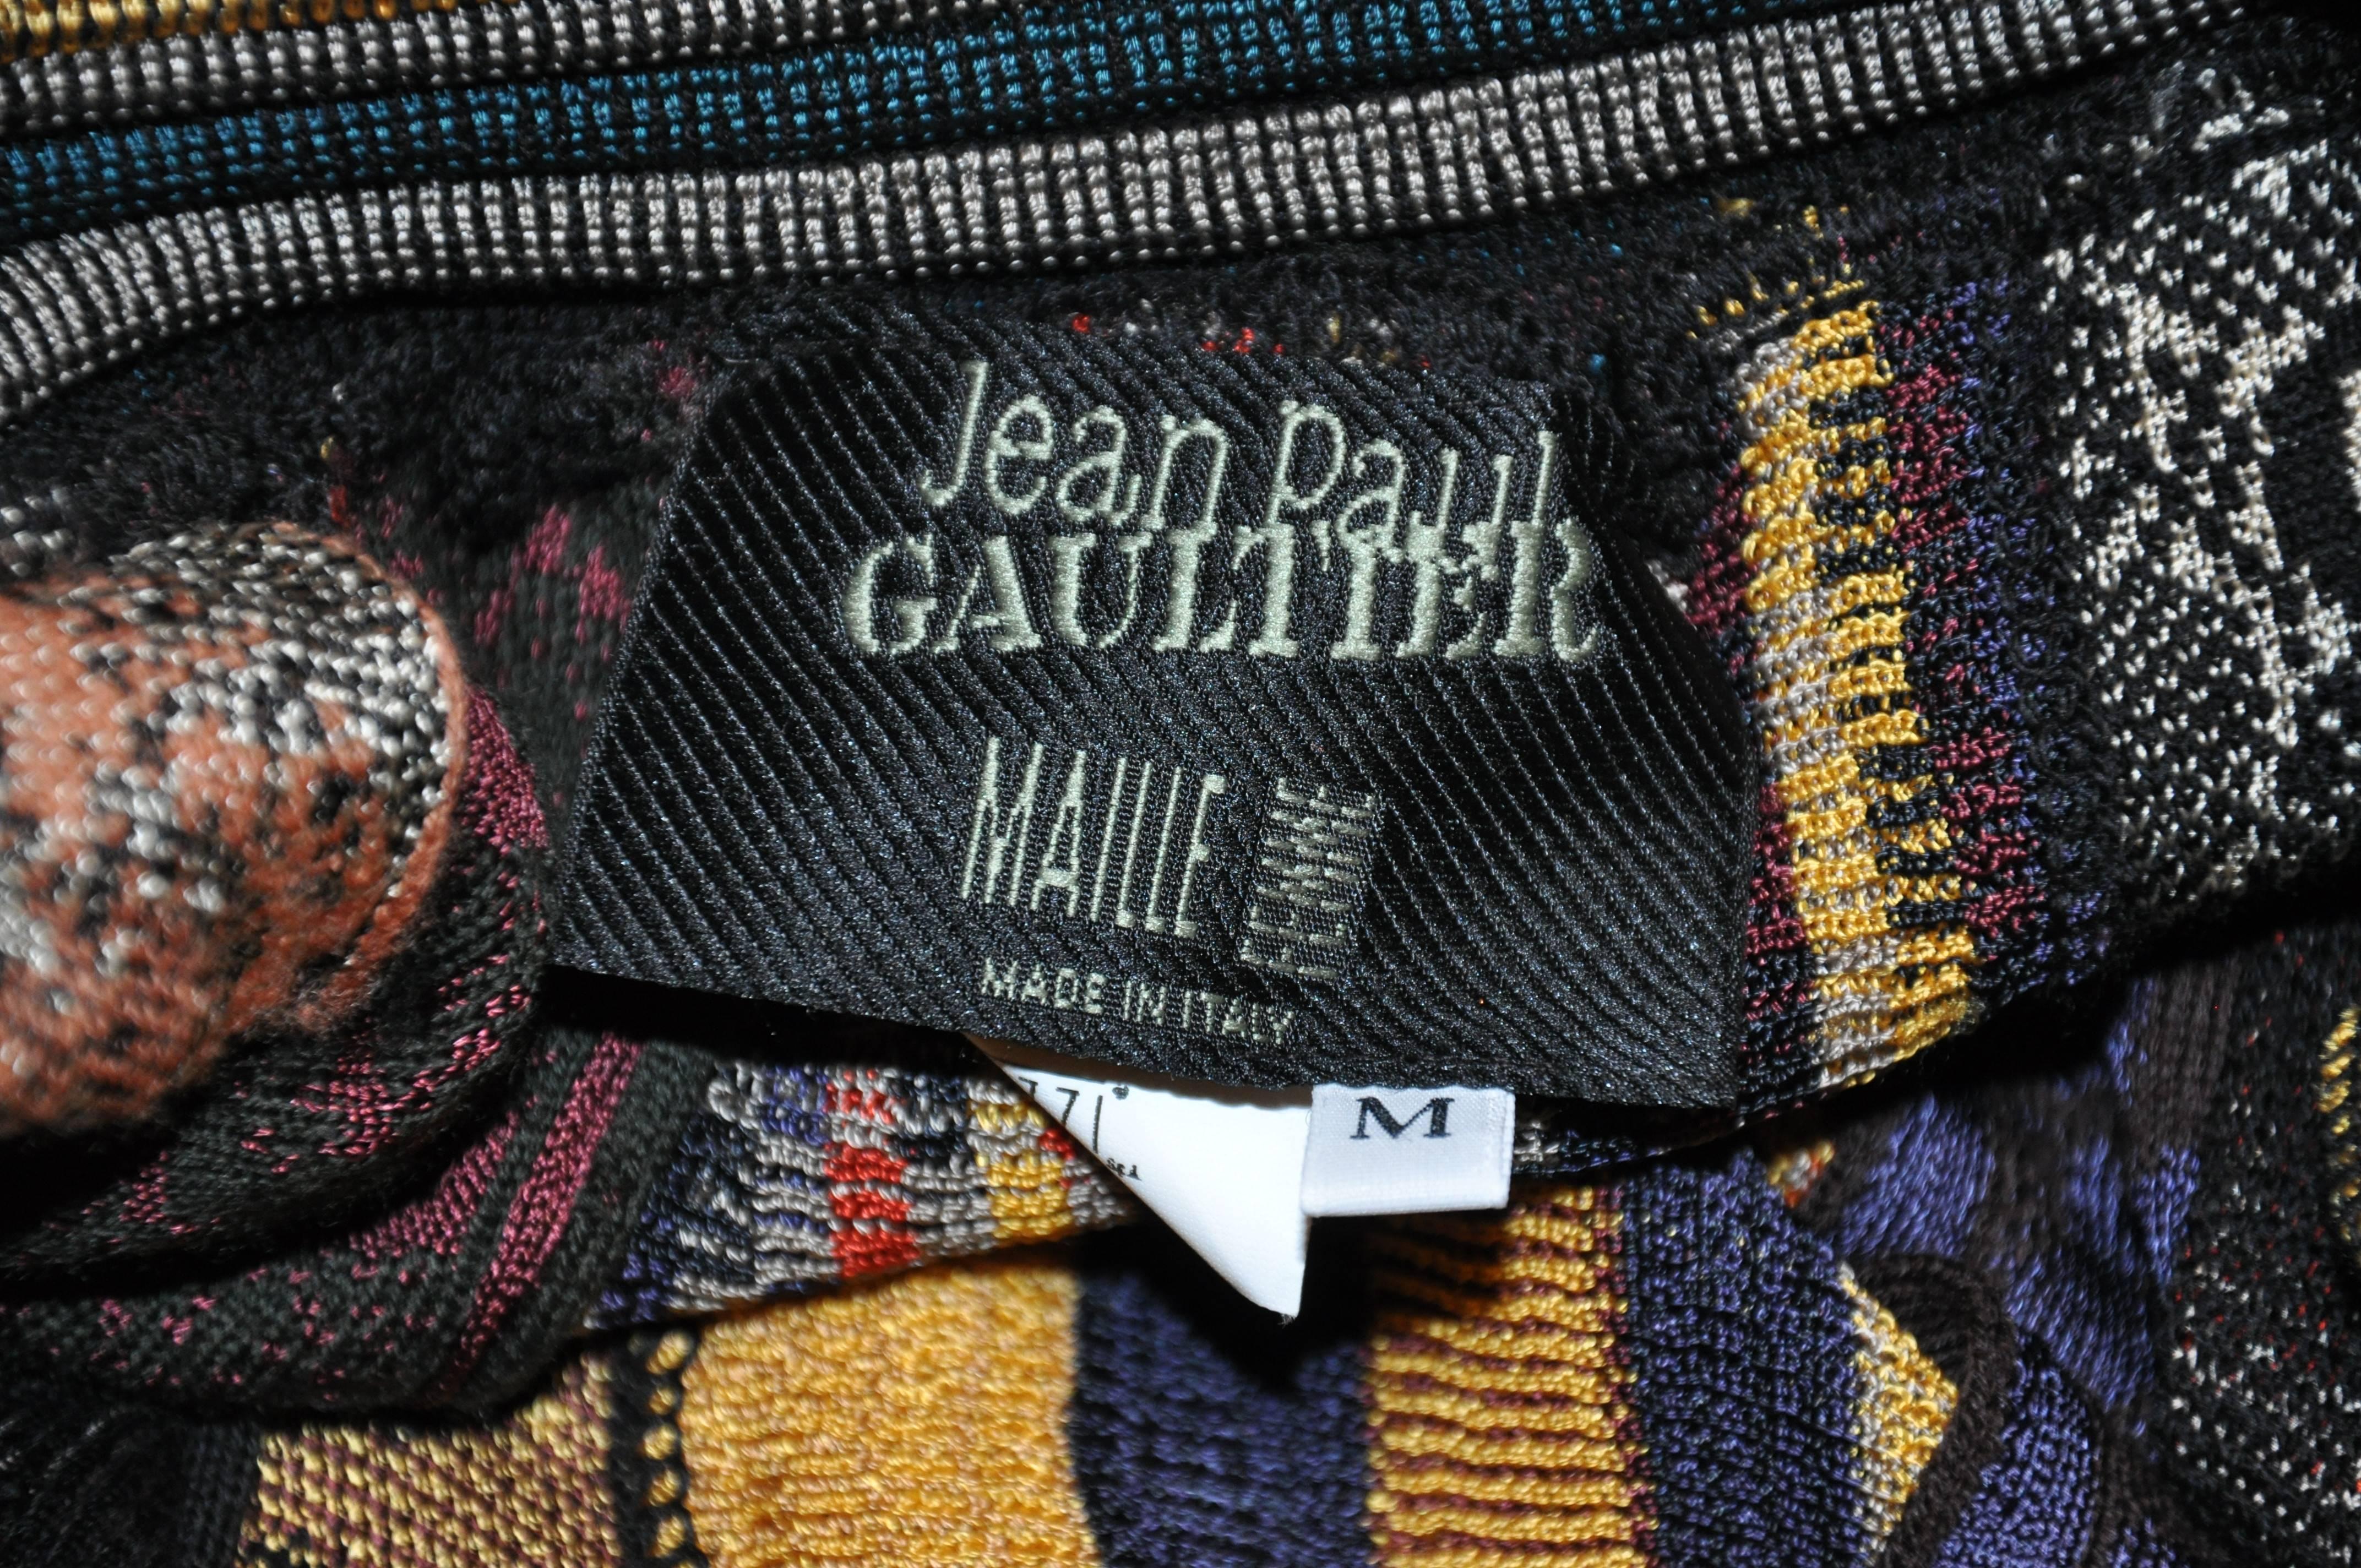            Jean Paul Gaultier wonderfully wicked at his best, optional strapless fringed dress & fringed maxi skirt. The multi-hand-knotted fringed measures 7 1/2